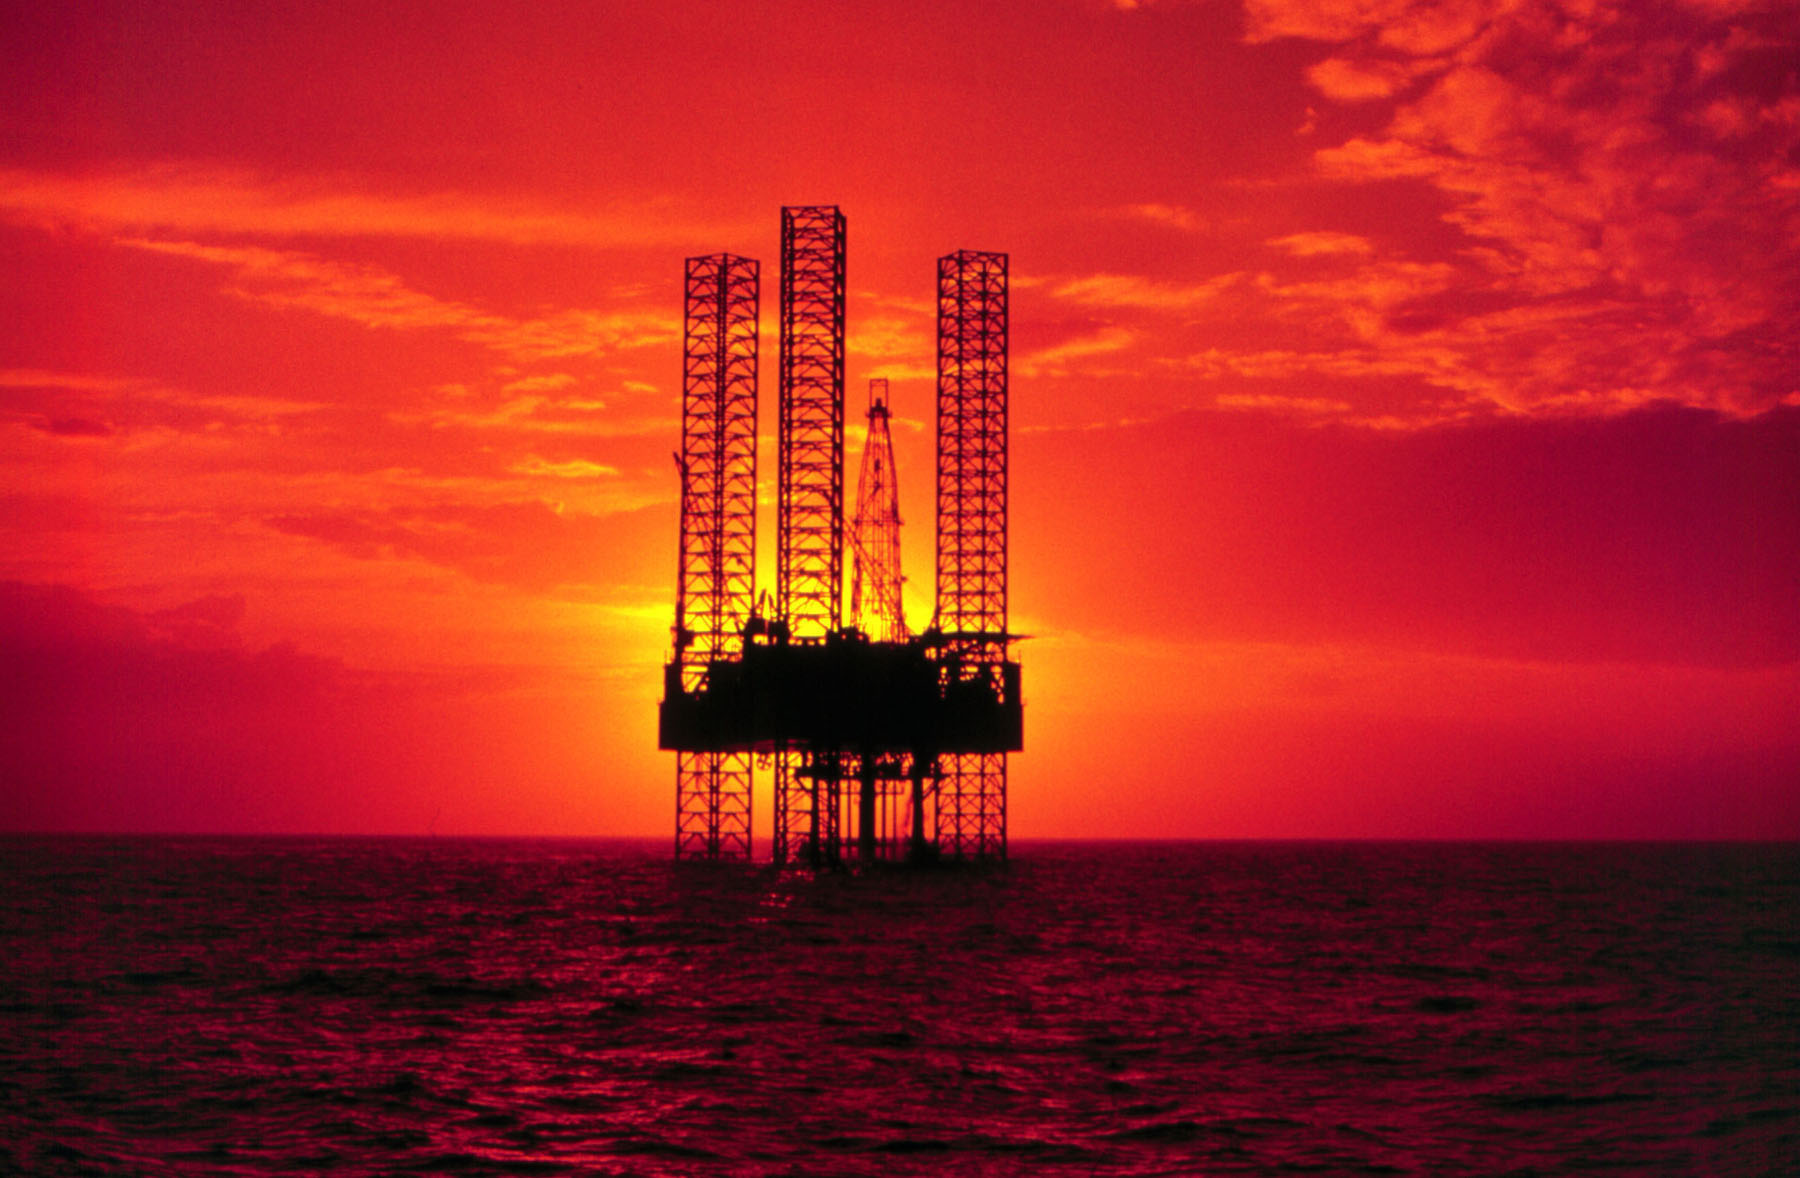 Pennzenergy Company Oil Exploration Drilling Rig In The Gulf Of Mexico During Sunset (Ph